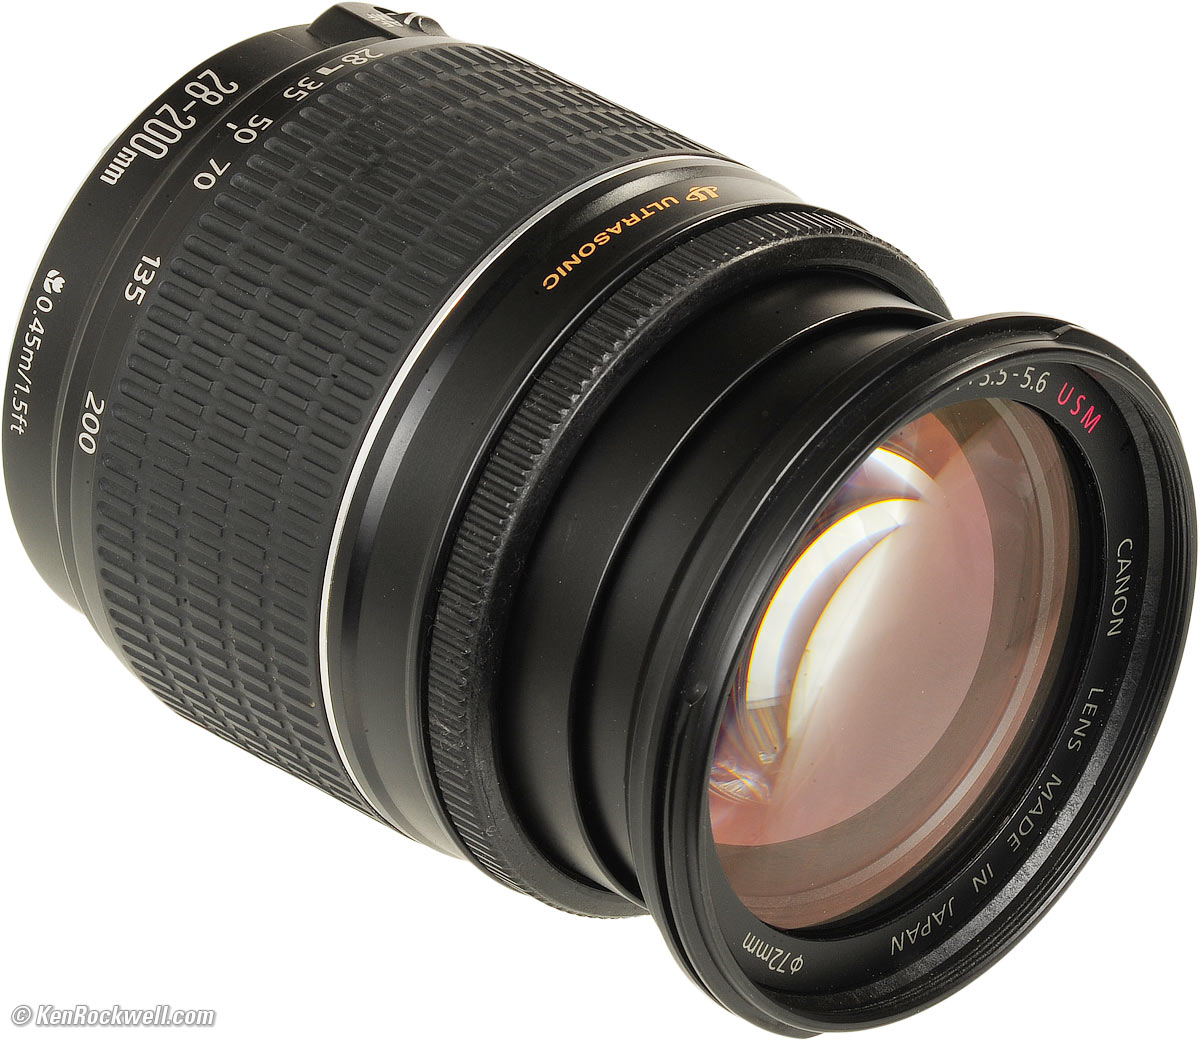 Canon 28-200mm f/3.5-5.6 USM Review